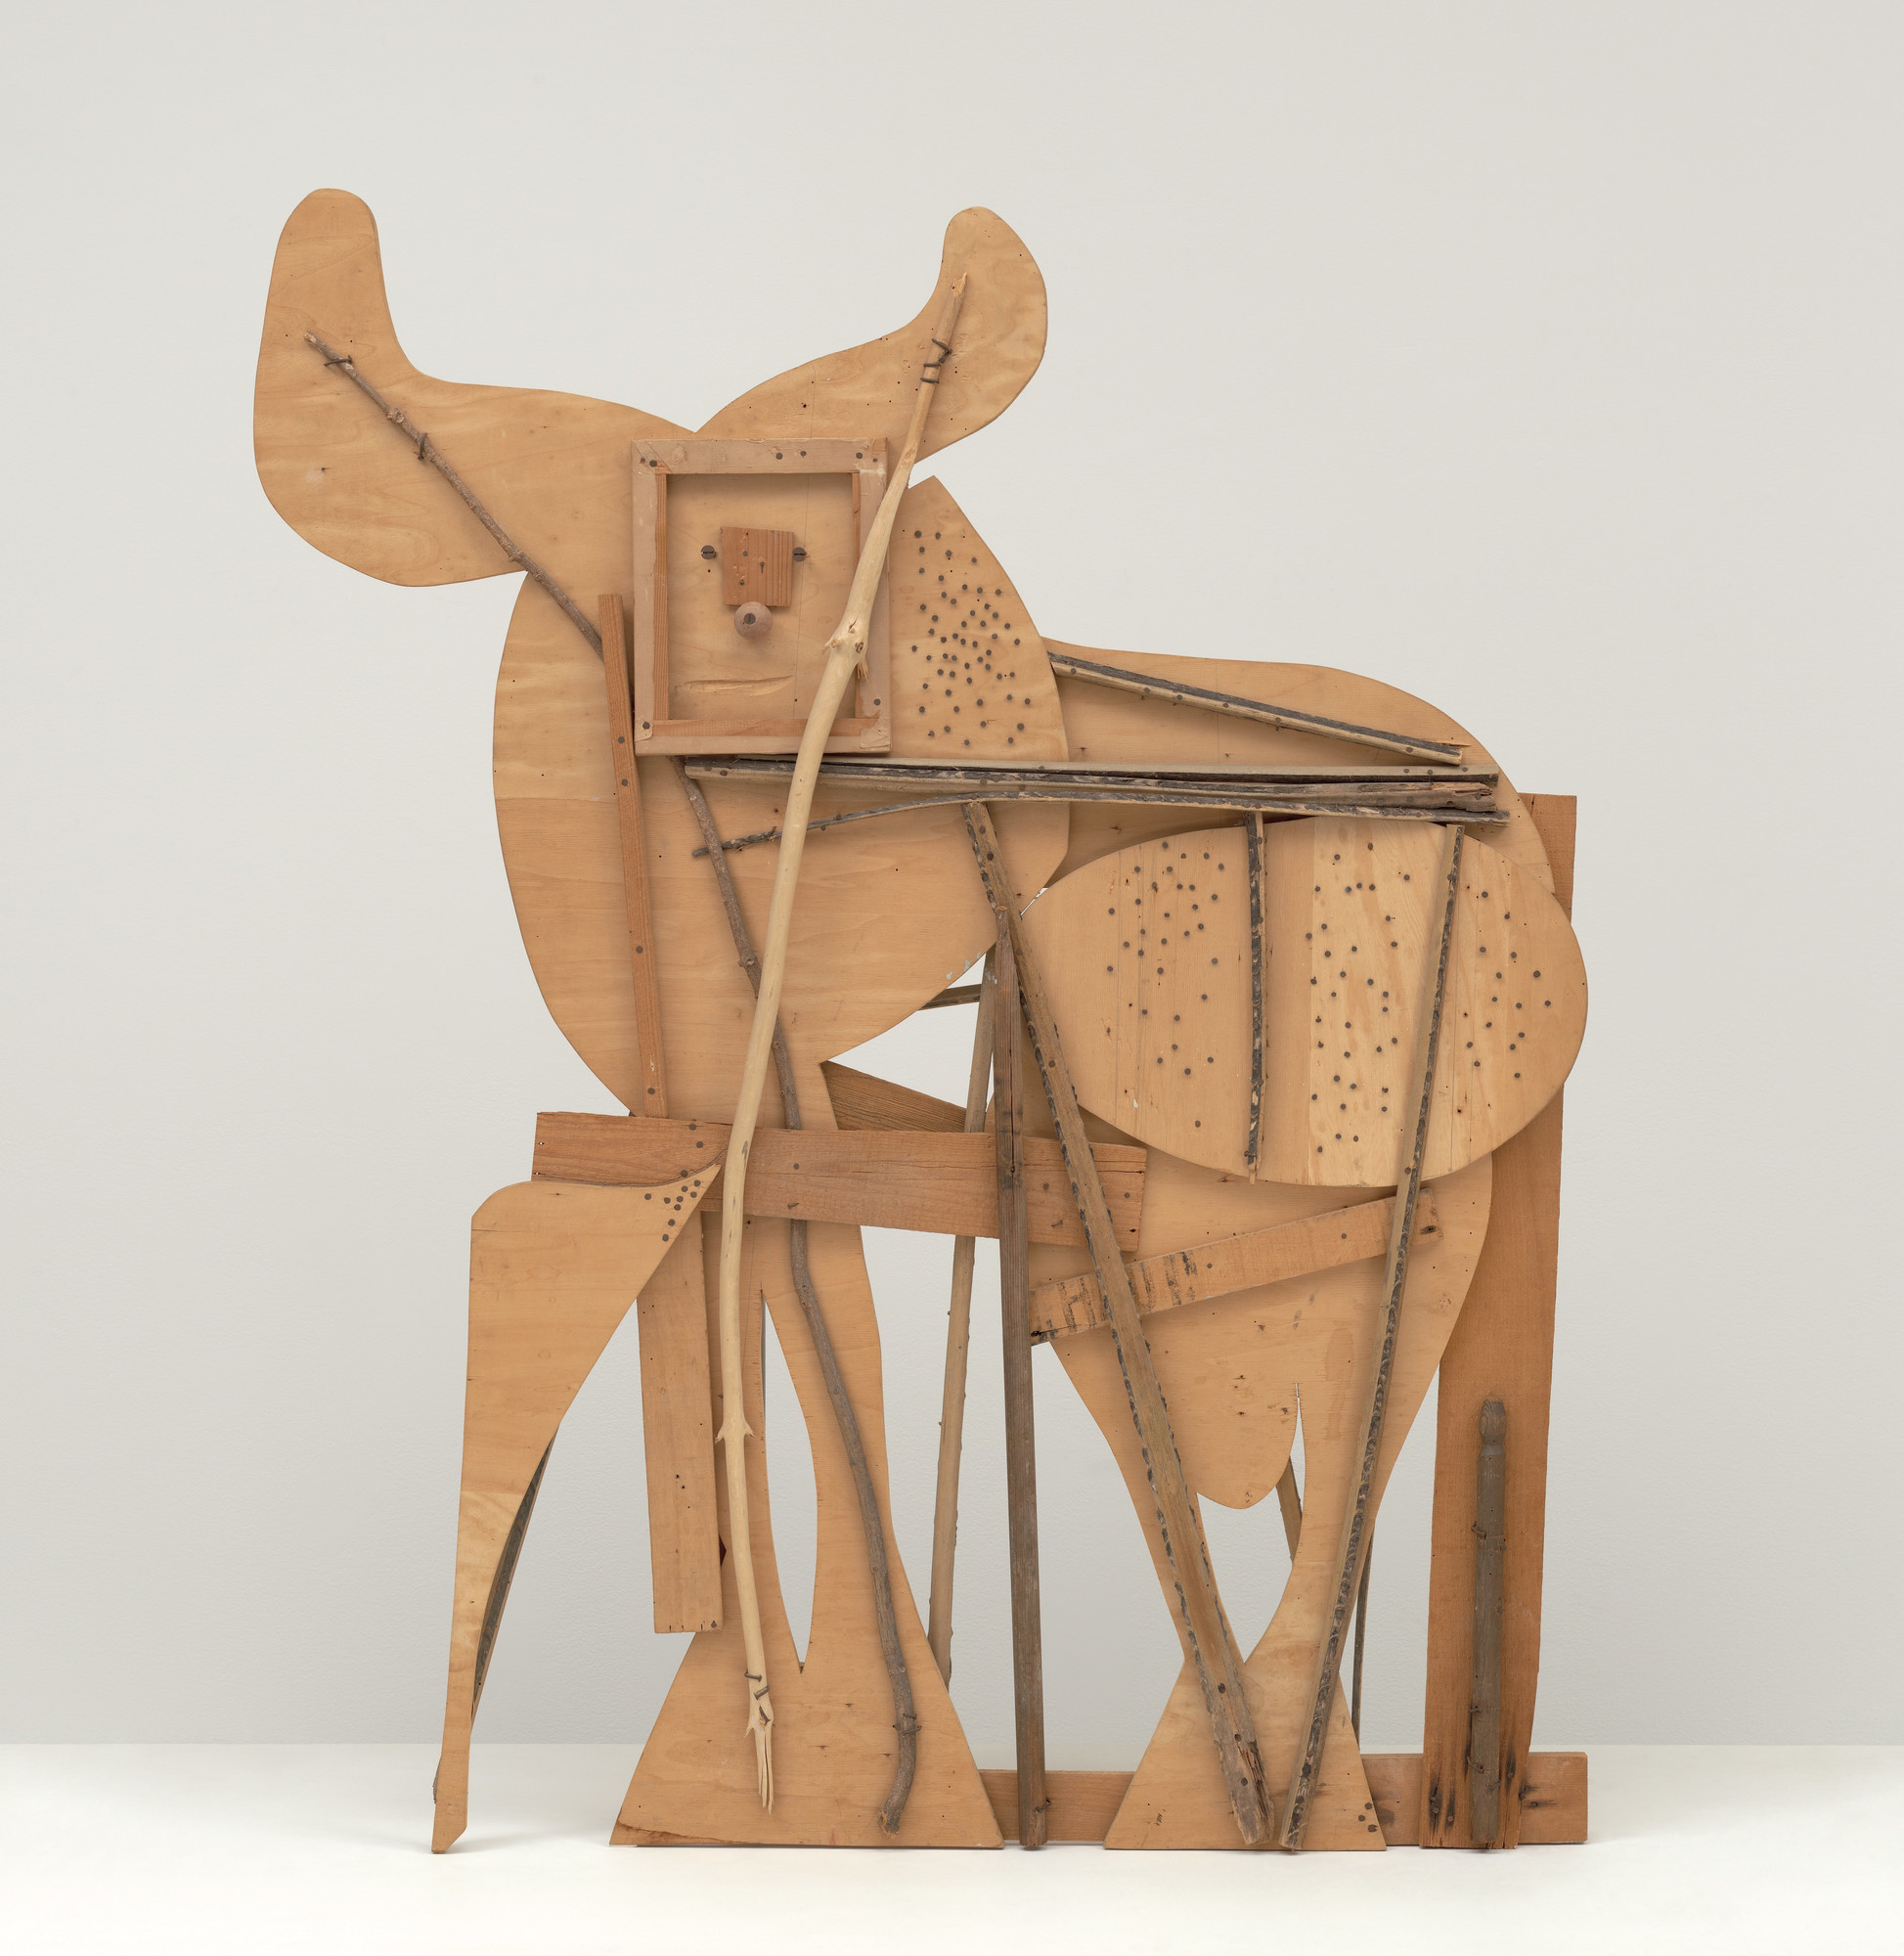 Picasso Sculpture: For Kids | MoMA